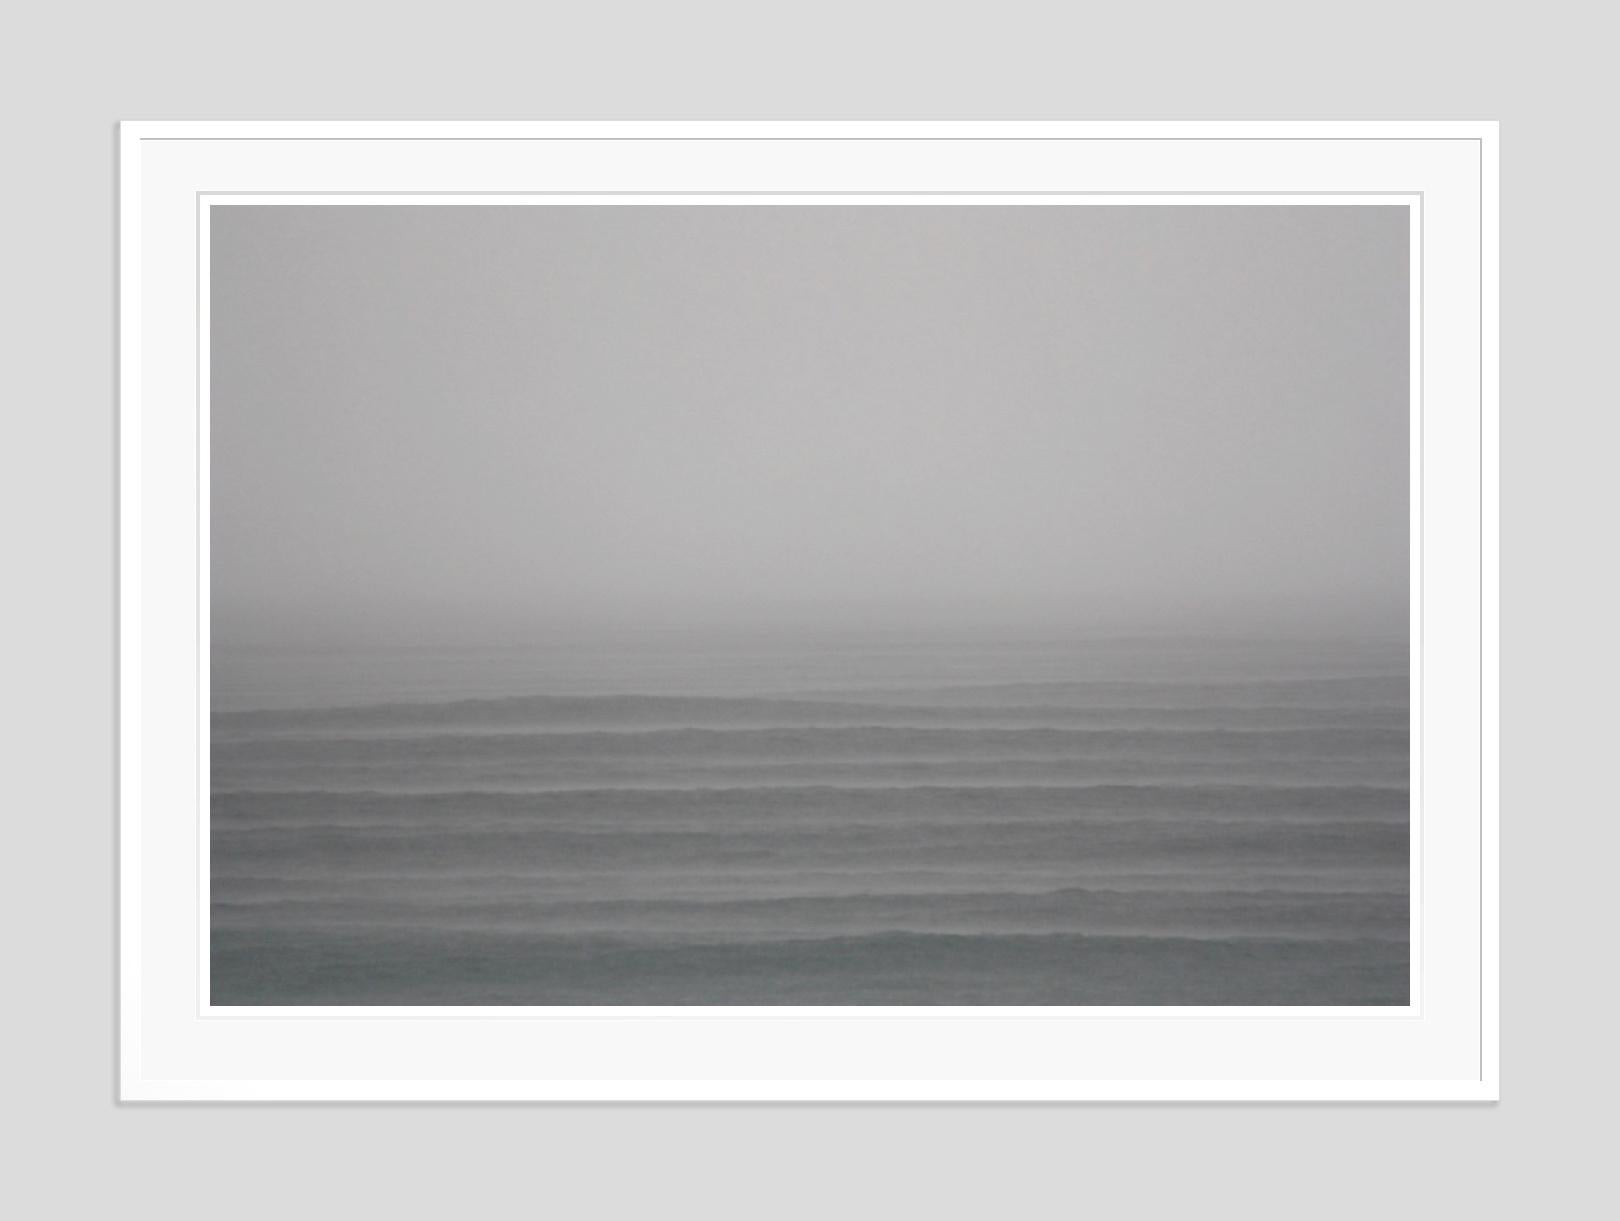 Calm Sea -  Oversize Signed Limited Edition Print  - Gray Black and White Photograph by Stuart Möller